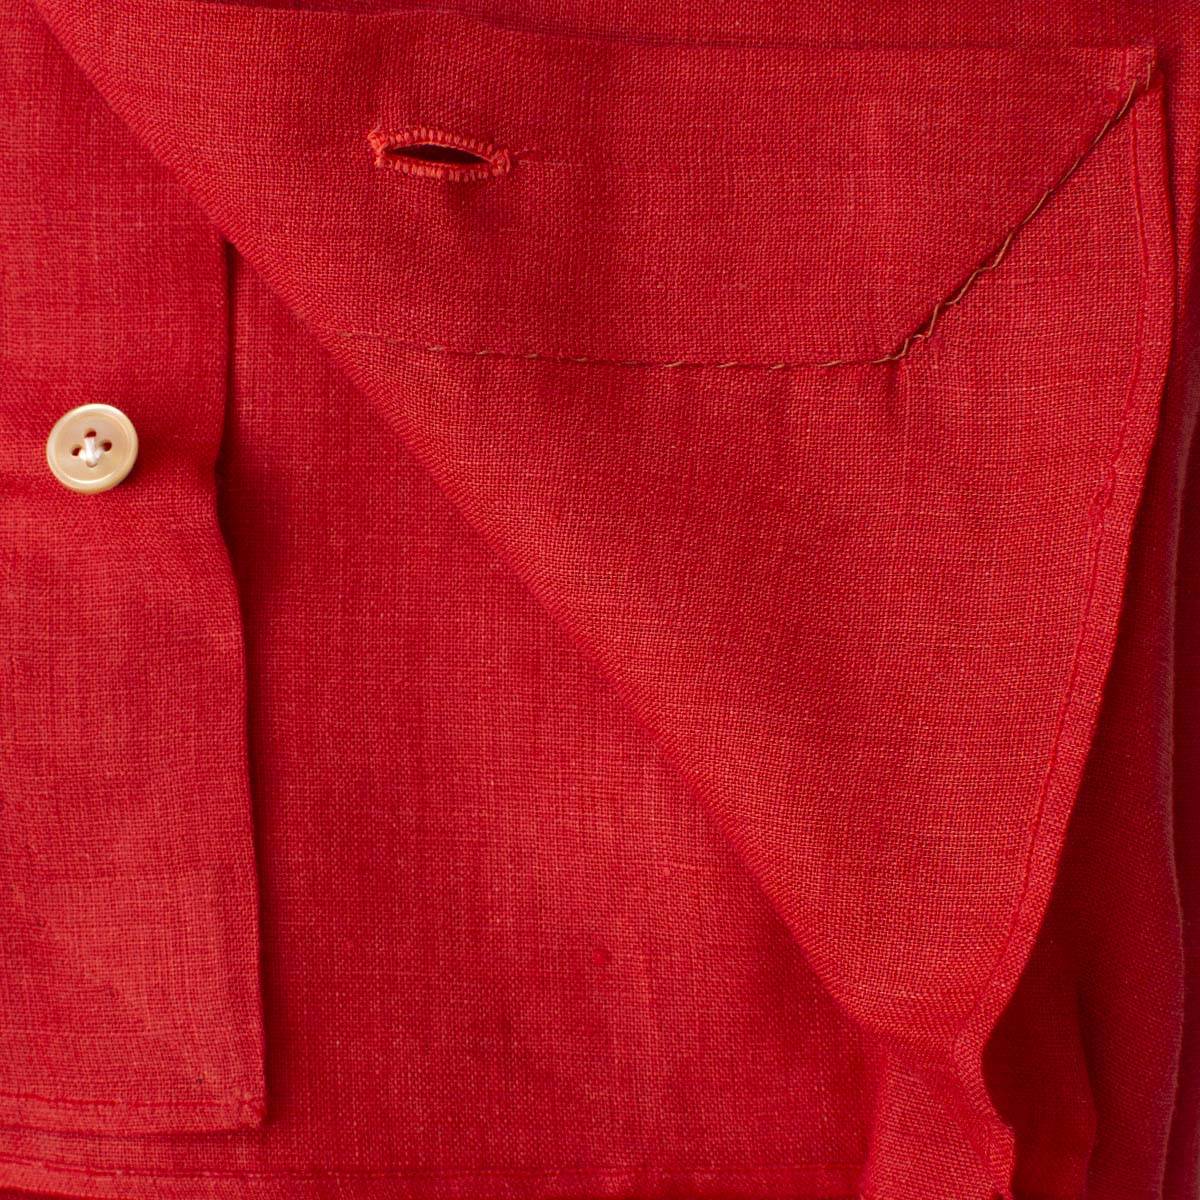 100% Red Linen shirt made with 12 steps by hand